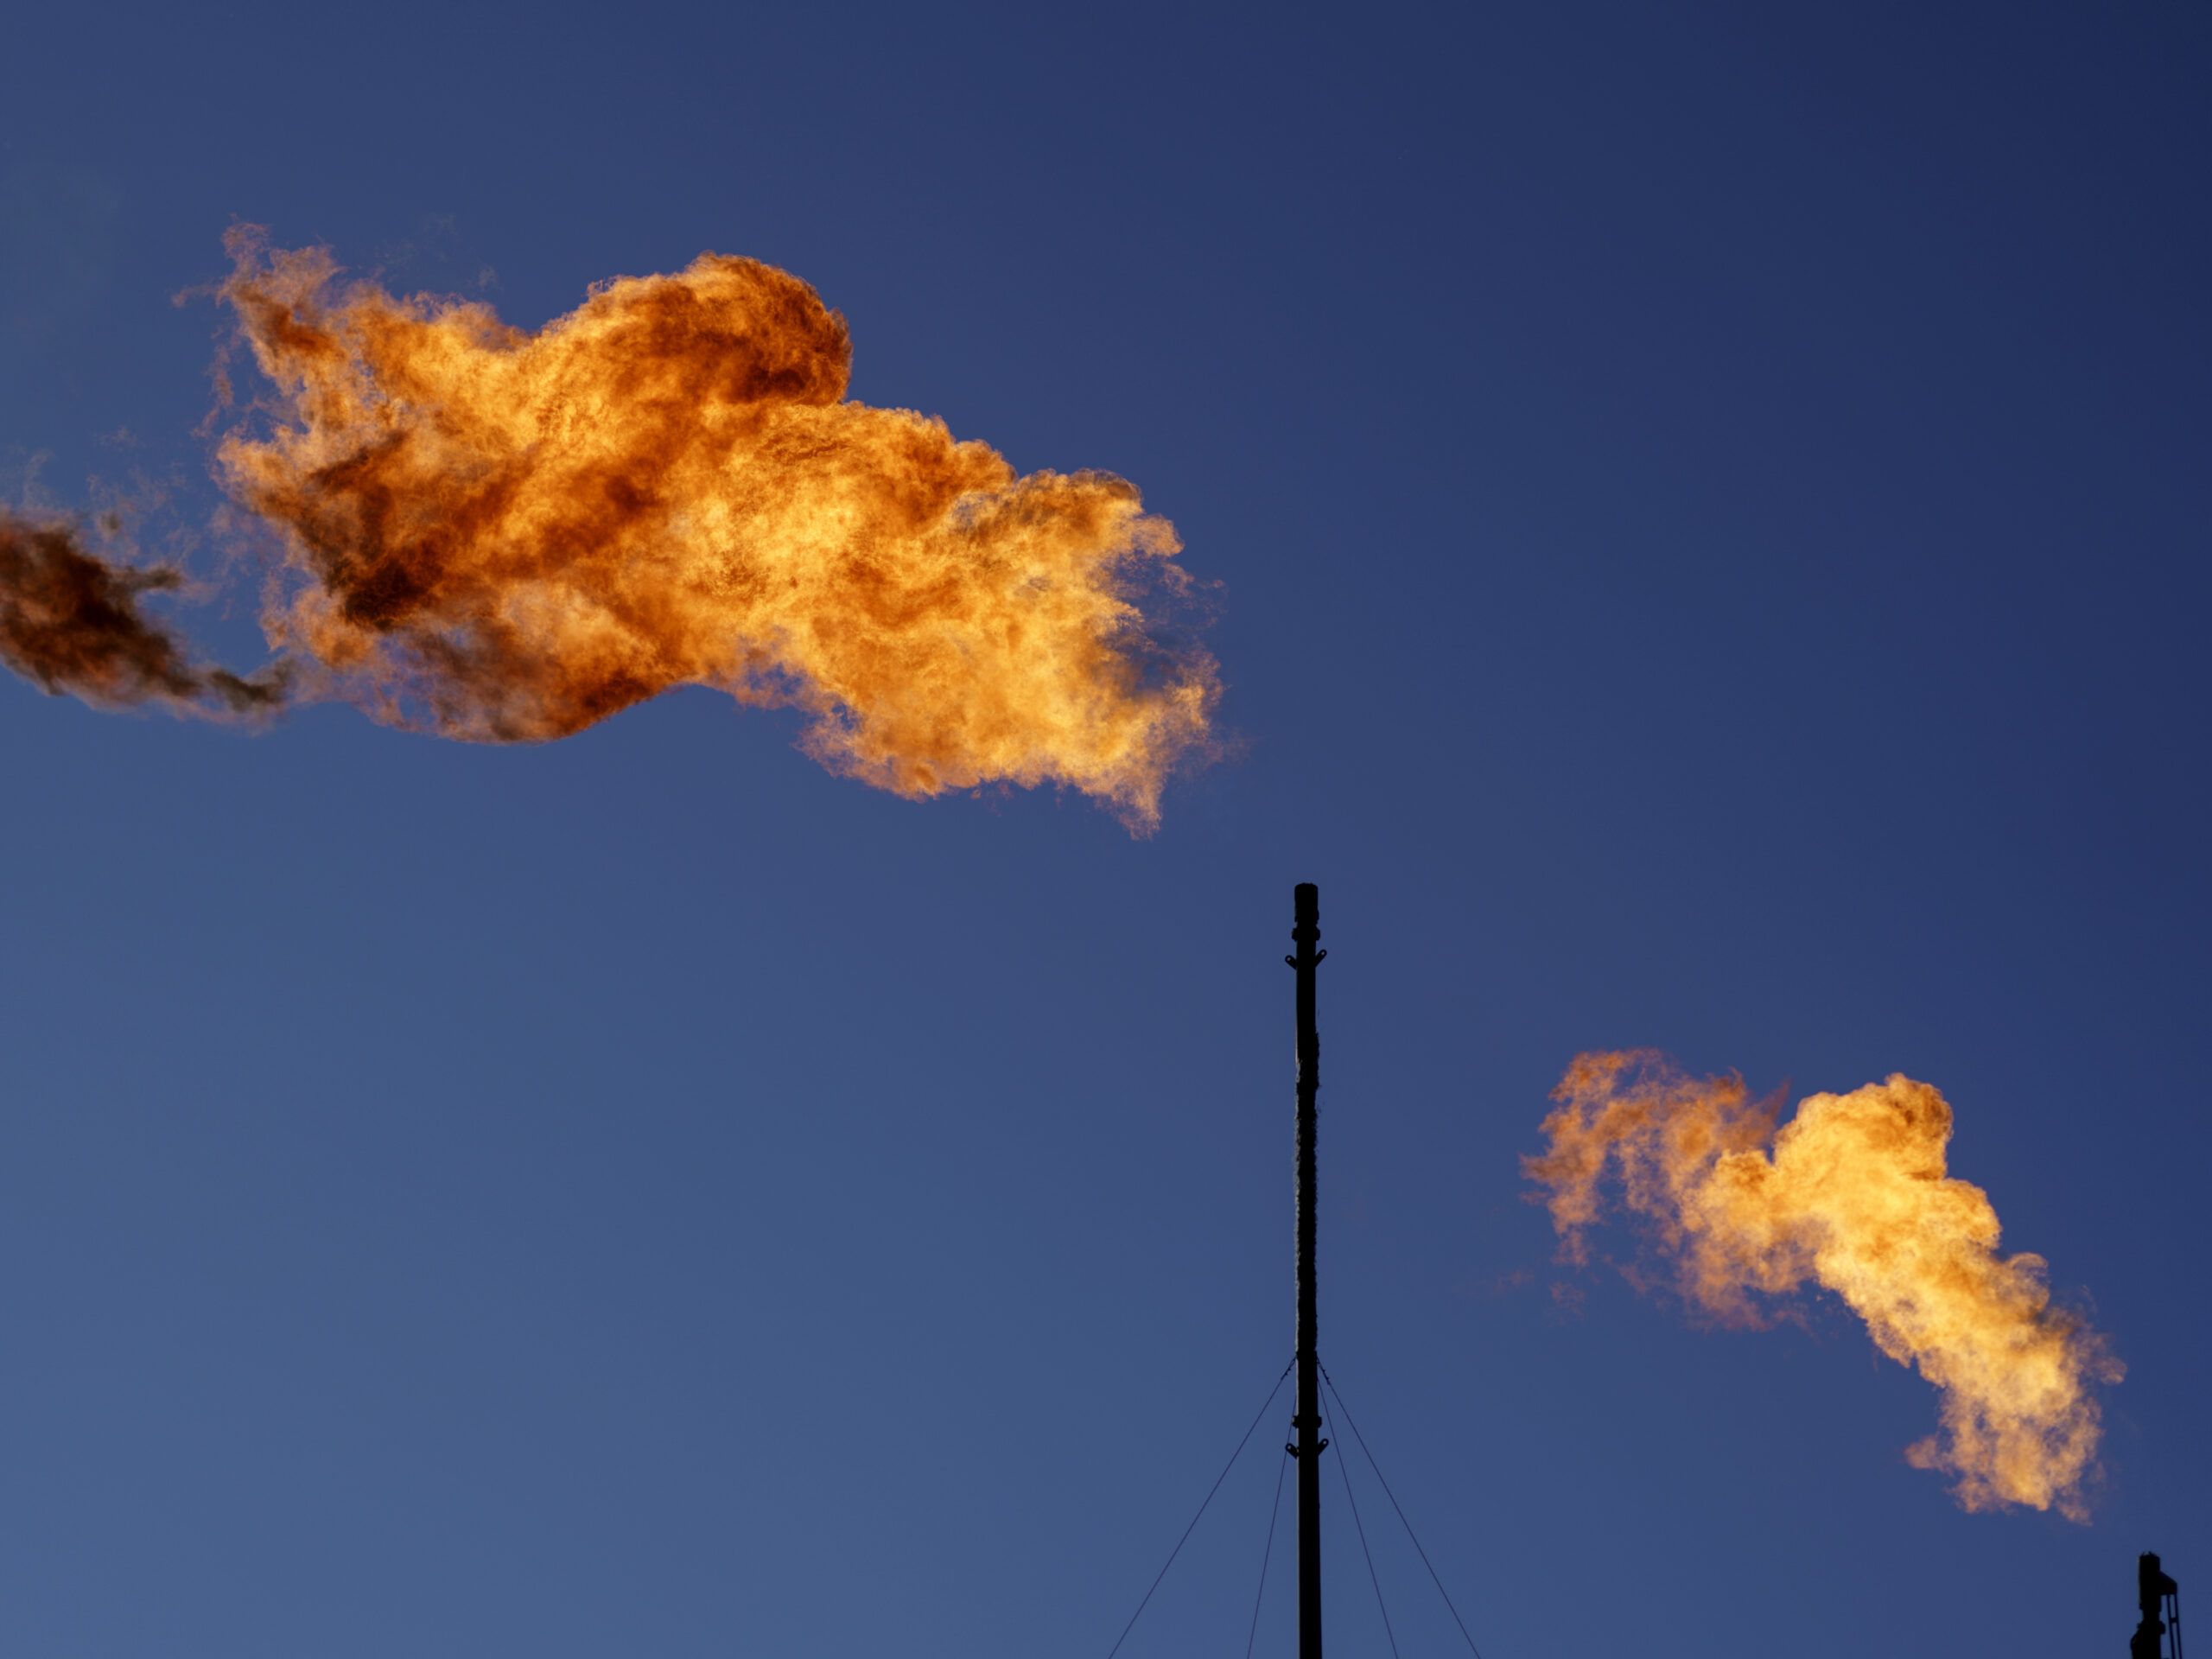 Oil and gas companies emit more climate-warming methane than EPA reports